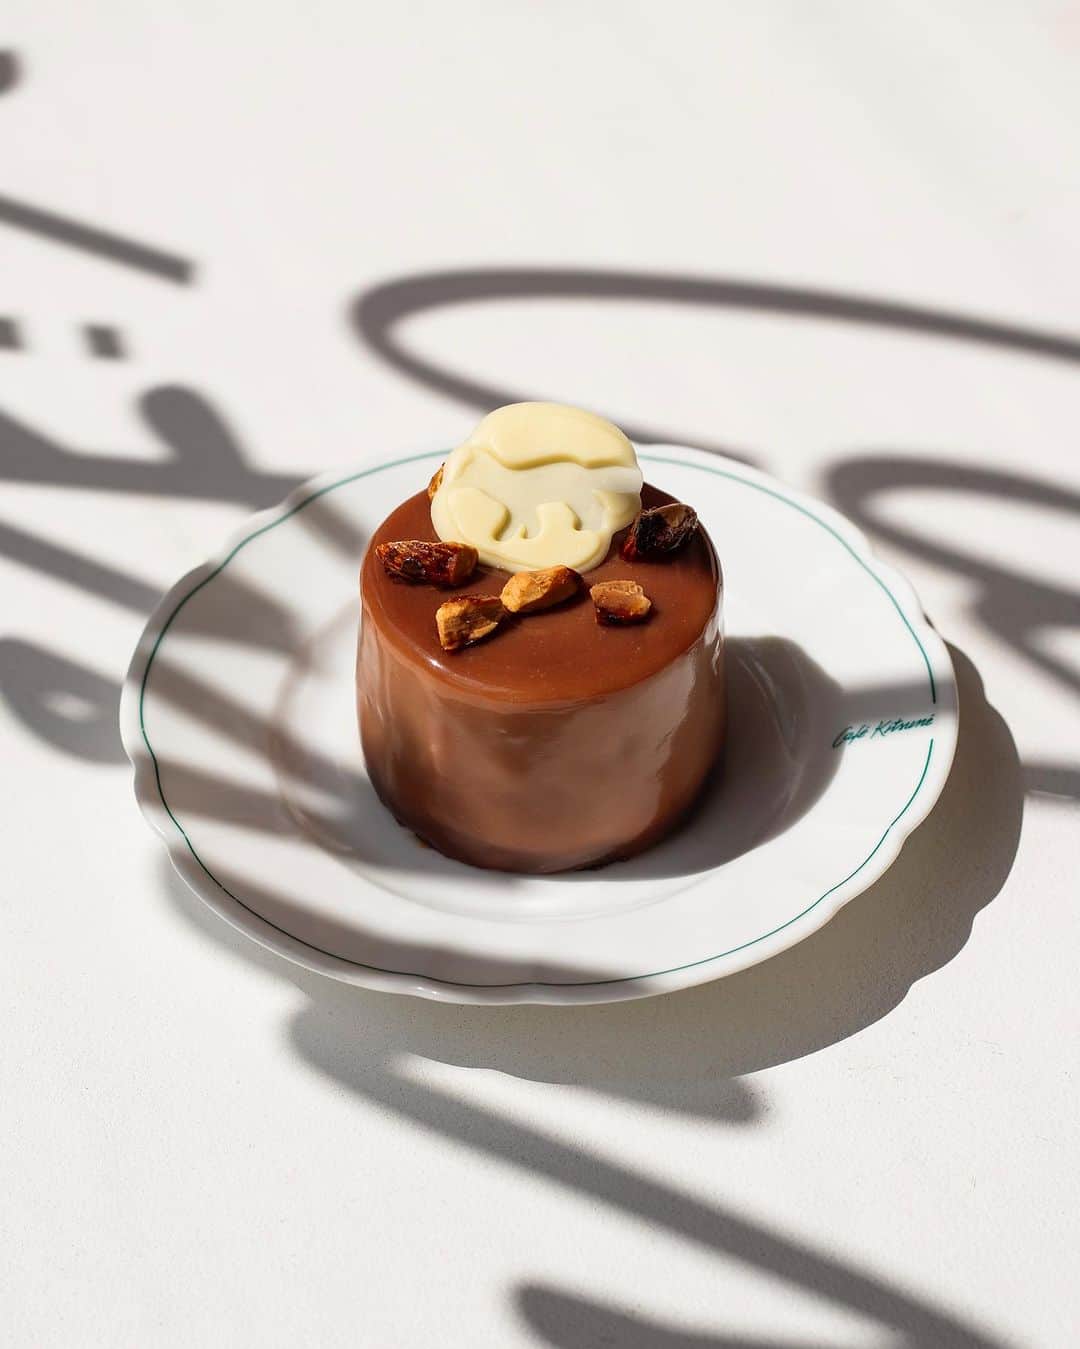 Café Kitsuné Parisのインスタグラム：「Dive into a world of exquisite flavors at #CafeKitsuneLouvre with our new dessert collection created for the season by Hélène Deguen  🥜 'Back to School': a symphony of praline cream, milk chocolate glaze, and caramelized nuts 🌸 ’Frosted Shiso Tart': a crisp creation blending almond cream, zesty shiso ganache, and delicate jasmine tea cream 🍋 ’Yuzu Cabbage': choux pastry bliss filled with yuzu cream, jelly, and a crown of Italian meringue 🍫 ’Chocolate Tart Venezuela': layers of cocoa luxury with dark chocolate ganache and salted caramel  Come to try them all till October 31st⁠⁠⁠⁠⁠⁠ - 👉 Café Kitsuné Louvre 2 place André Malraux, 75001 Paris Monday-Sunday: 8:00am-6:30pm」